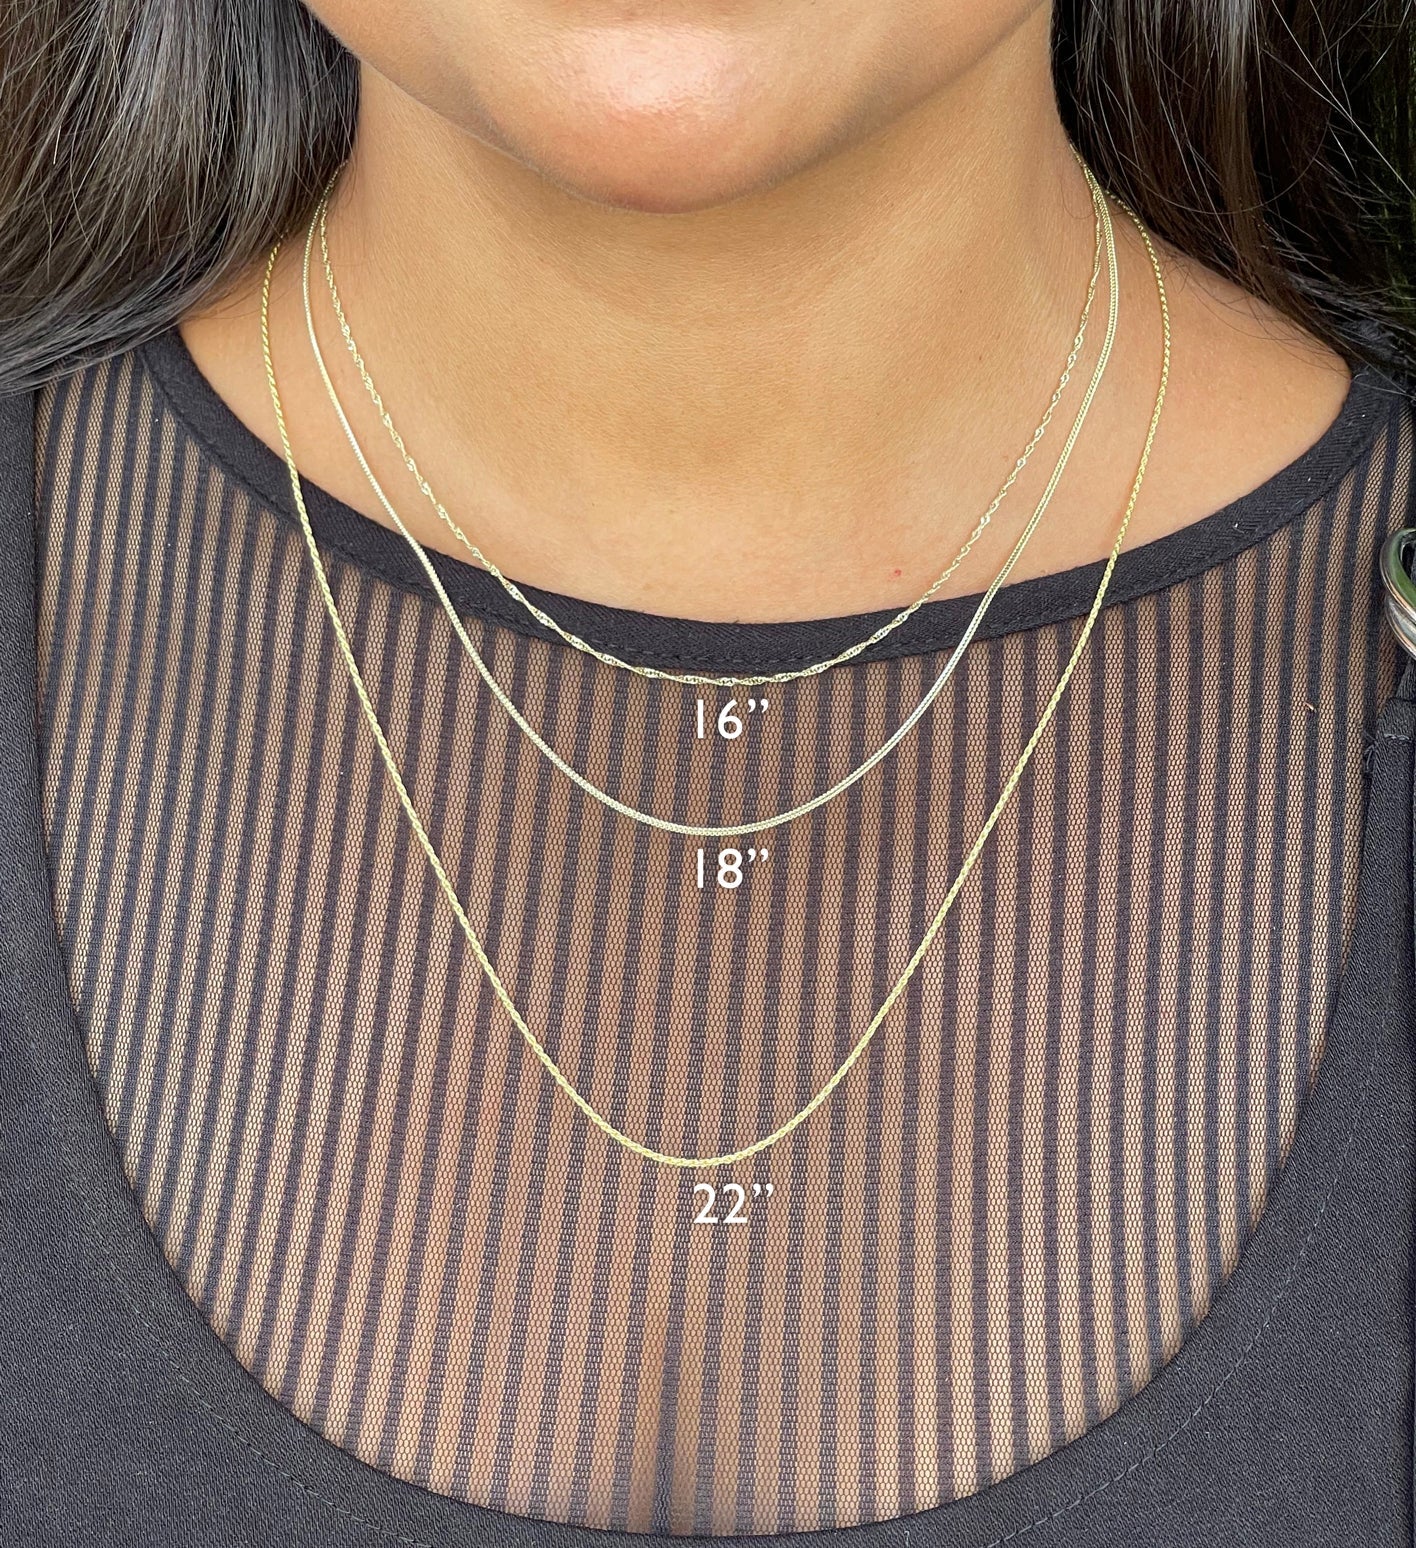 Choker Necklace 14K Yellow Gold Semi-Hollow Figaro Link 16 Inches 2.5mm  63426: buy online in NYC. Best price at TRAXNYC.